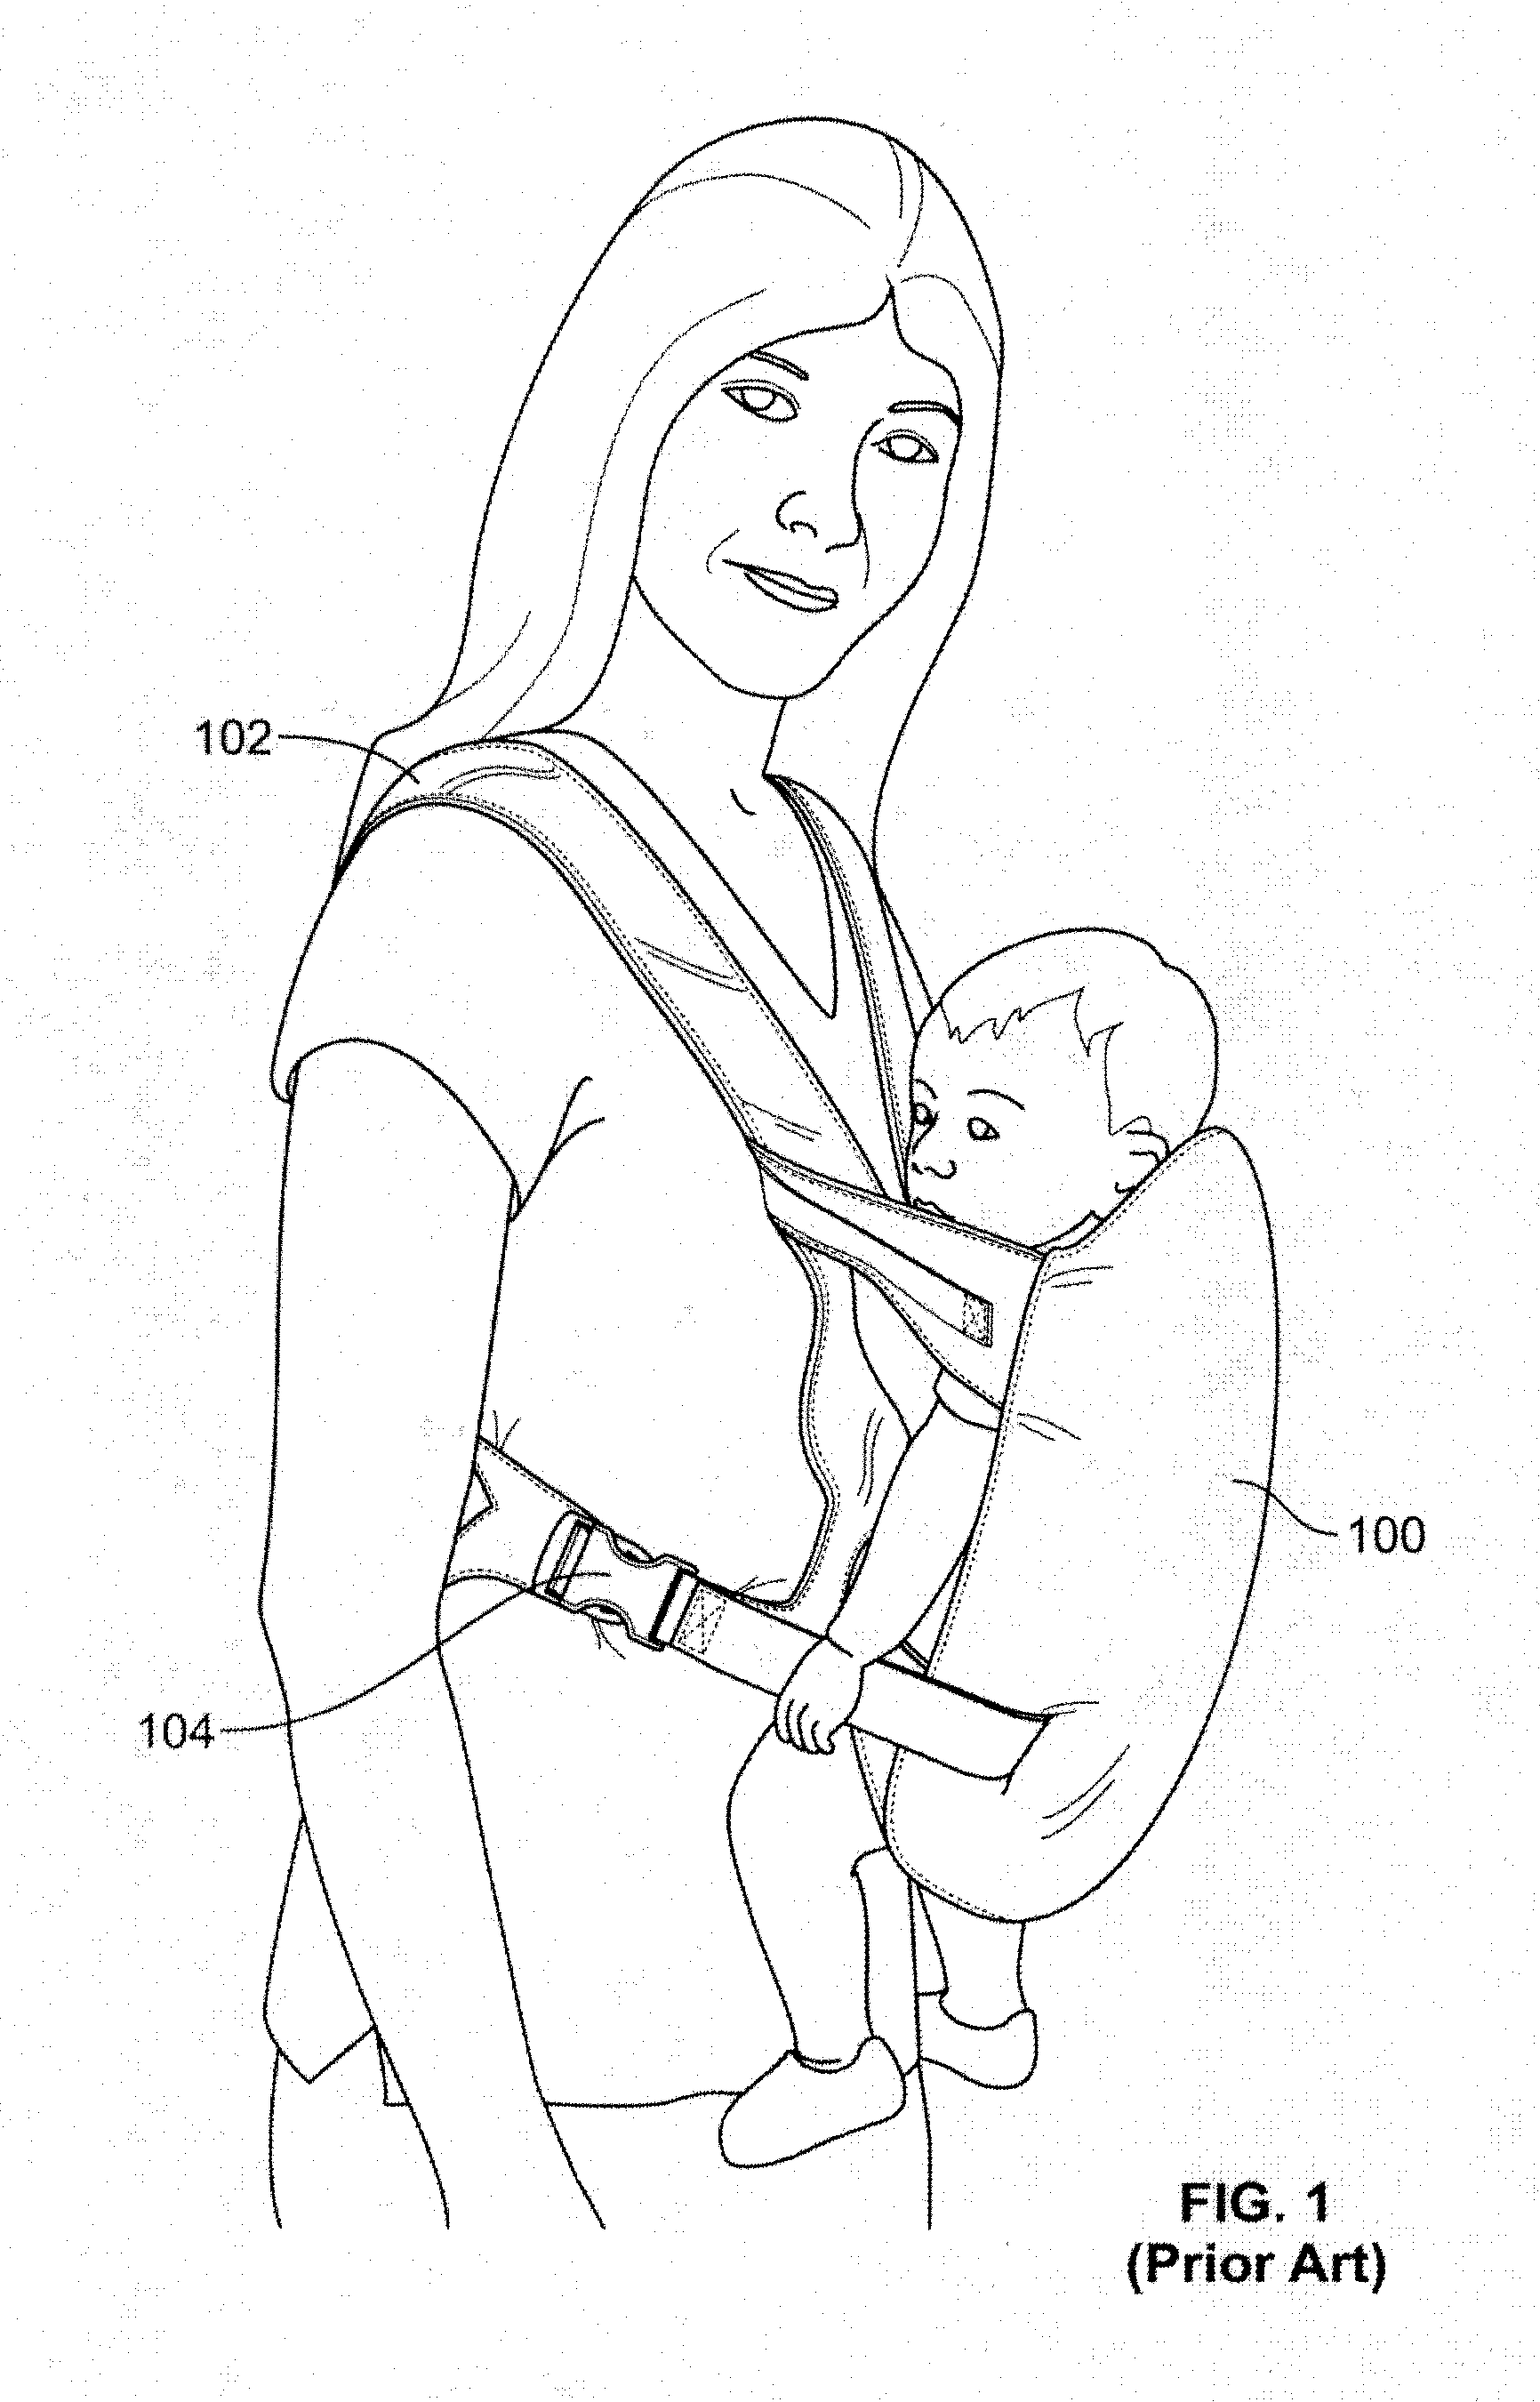 Strap-on child carrier with support seating element